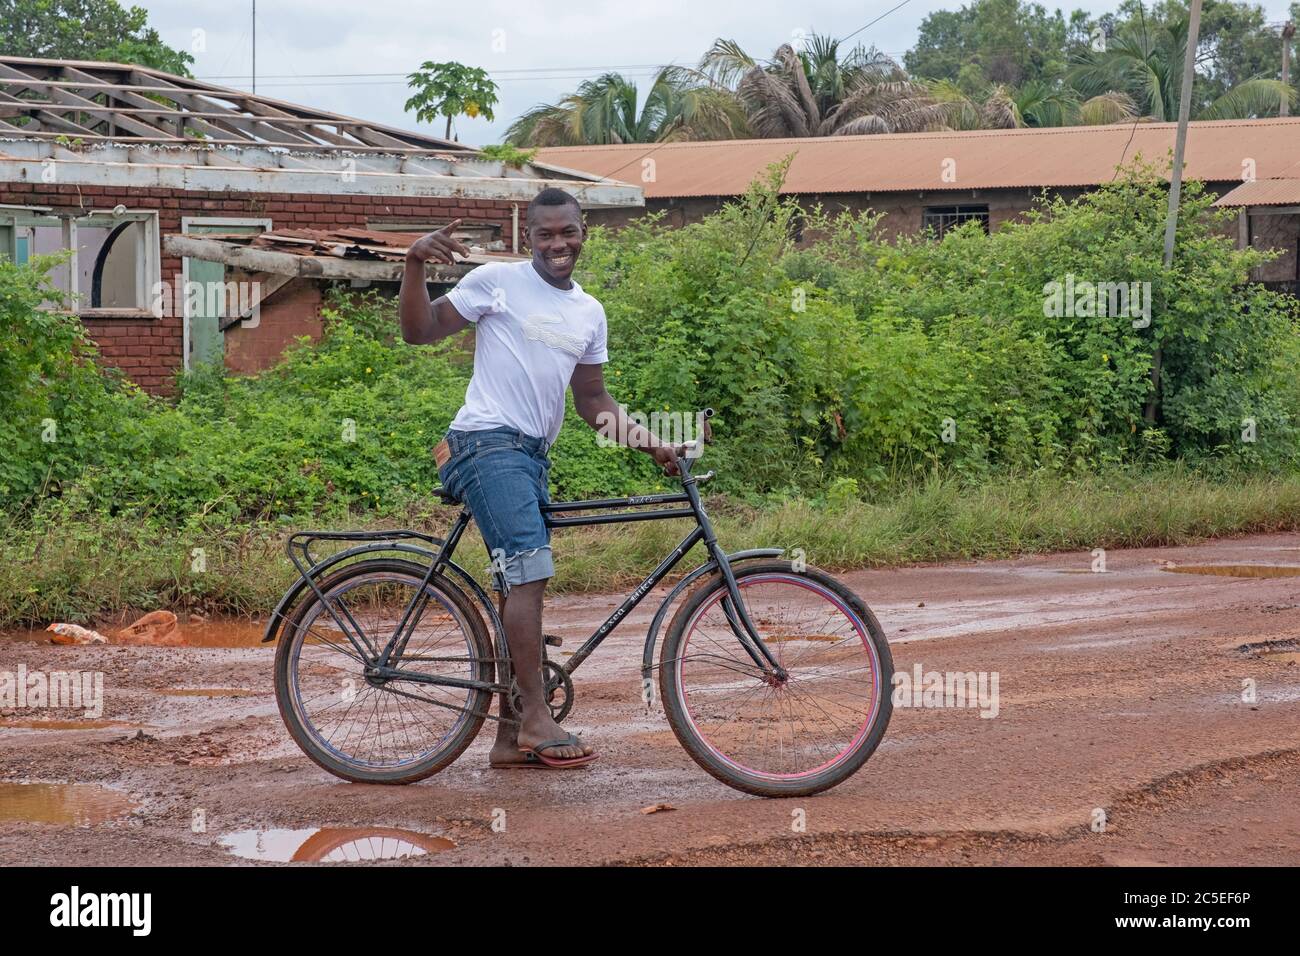 Local cyclist riding along muddy dirt road in the village Lethem during the rainy season, Upper Takutu-Upper Essequibo region, Guyana, South America Stock Photo